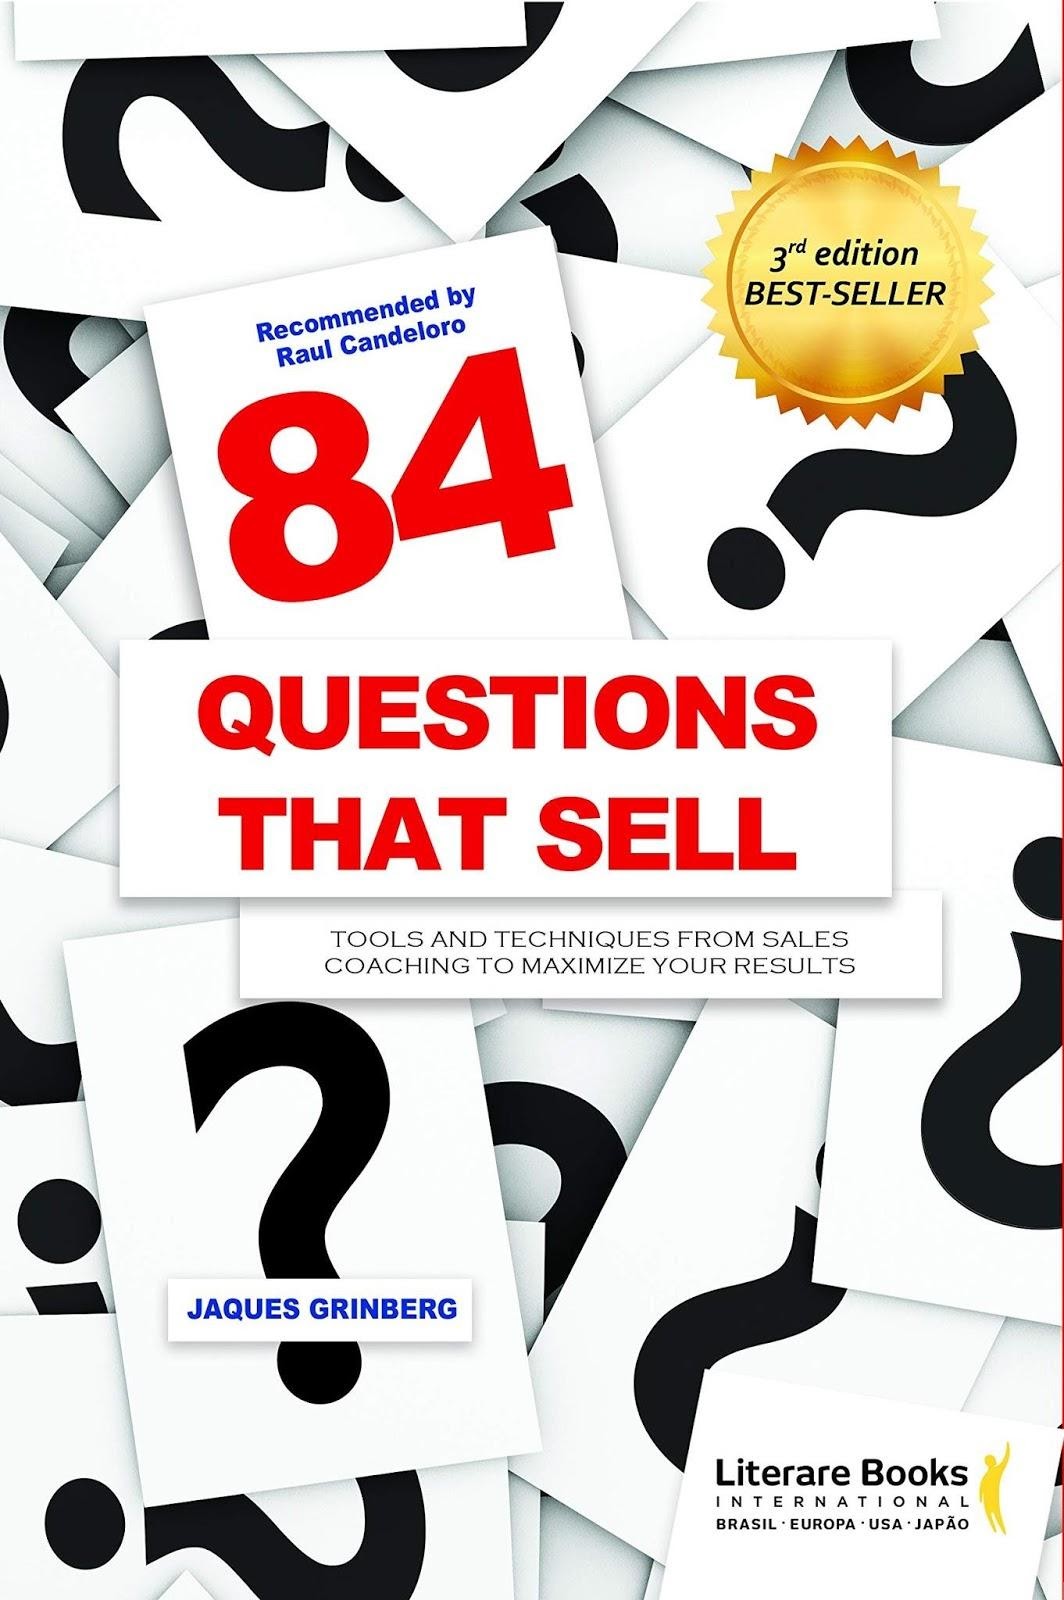 Book '84 Questions that Sell'